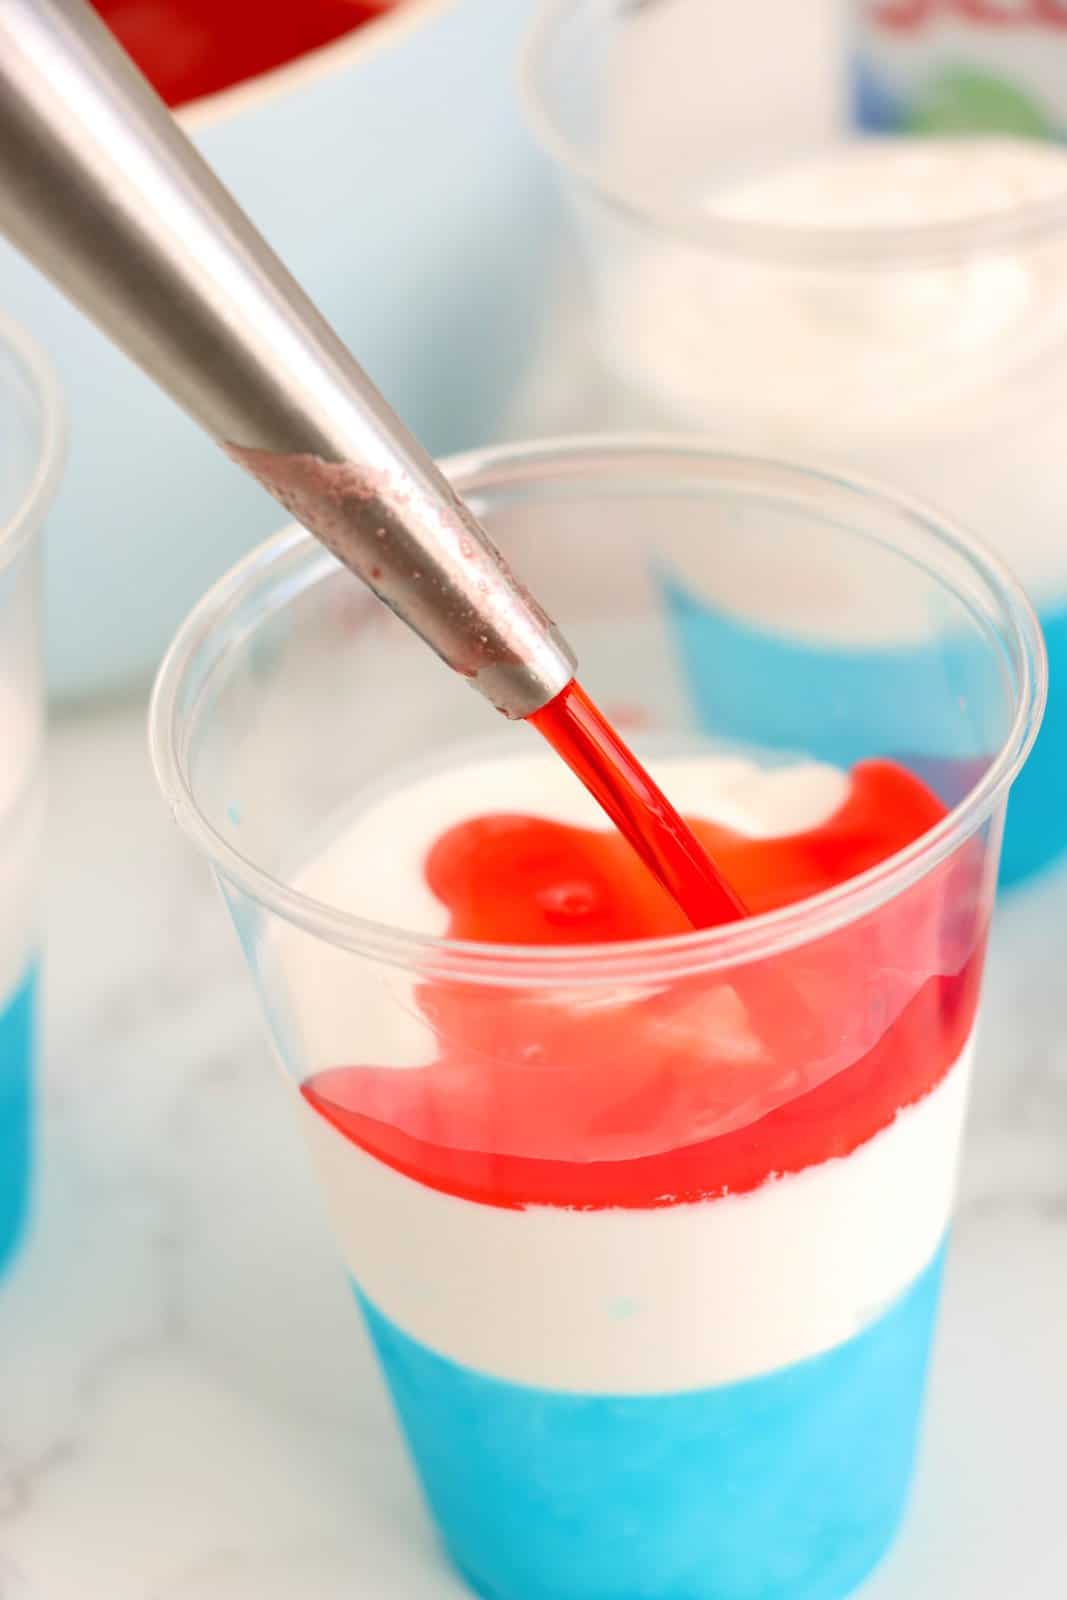 A turkey baster pouring red jello on top of whipped cream and blue jello.